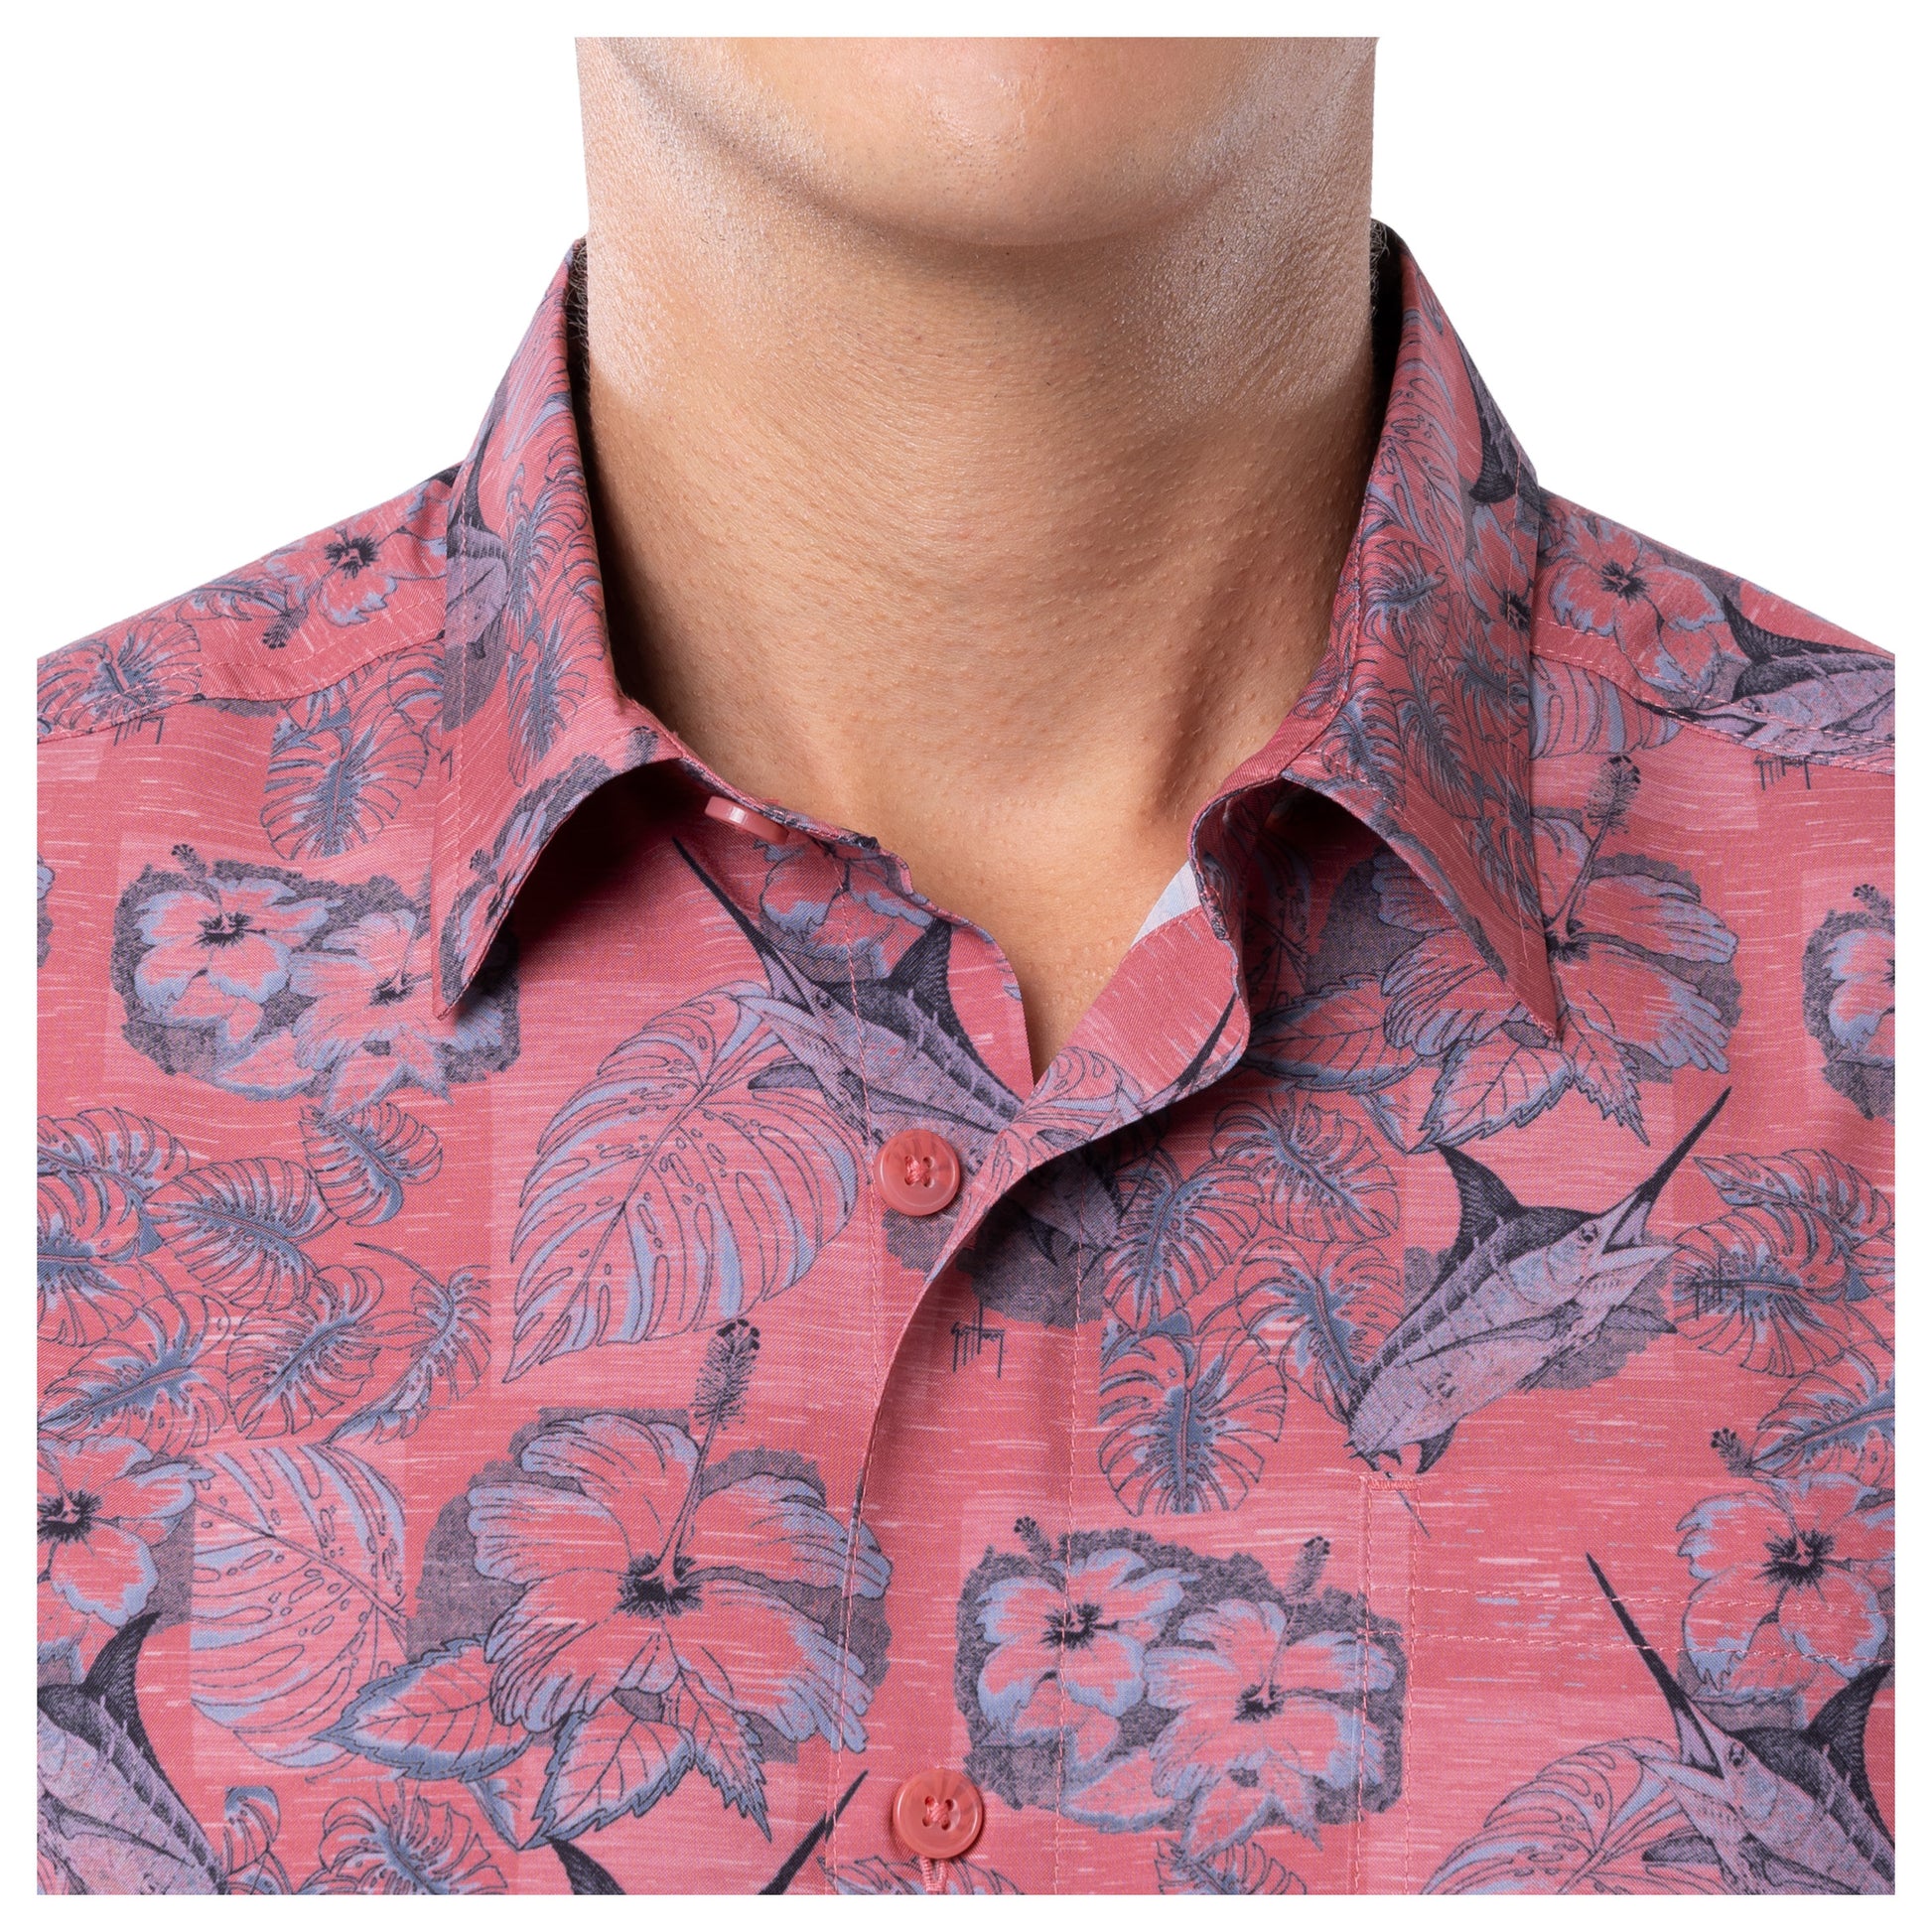 How To Wear Floral Prints For Men | A Detailed Guide To Wearing Floral –  The Dark Knot